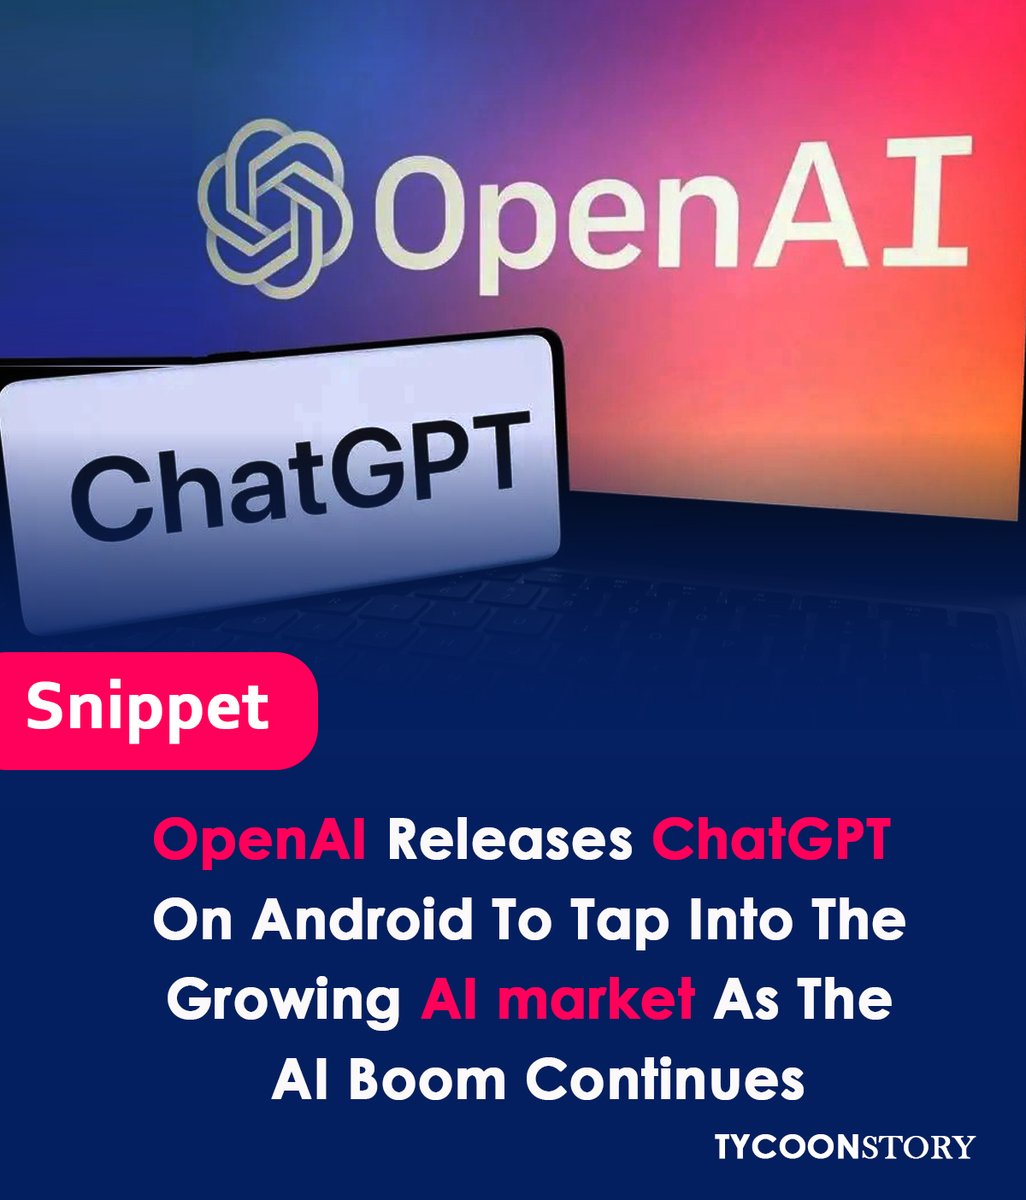 Openai Brings Chatgpt To Android As The Ai Boom Continues
#AIboom #chatgpt #androidapp #GoogleAssistant #machinelearning #techtitans #bardchatbot #microsoftbingchat #gpt4technology #applications #futuretech #AIinnovations #amwriting #aiprogramming  @OpenAI